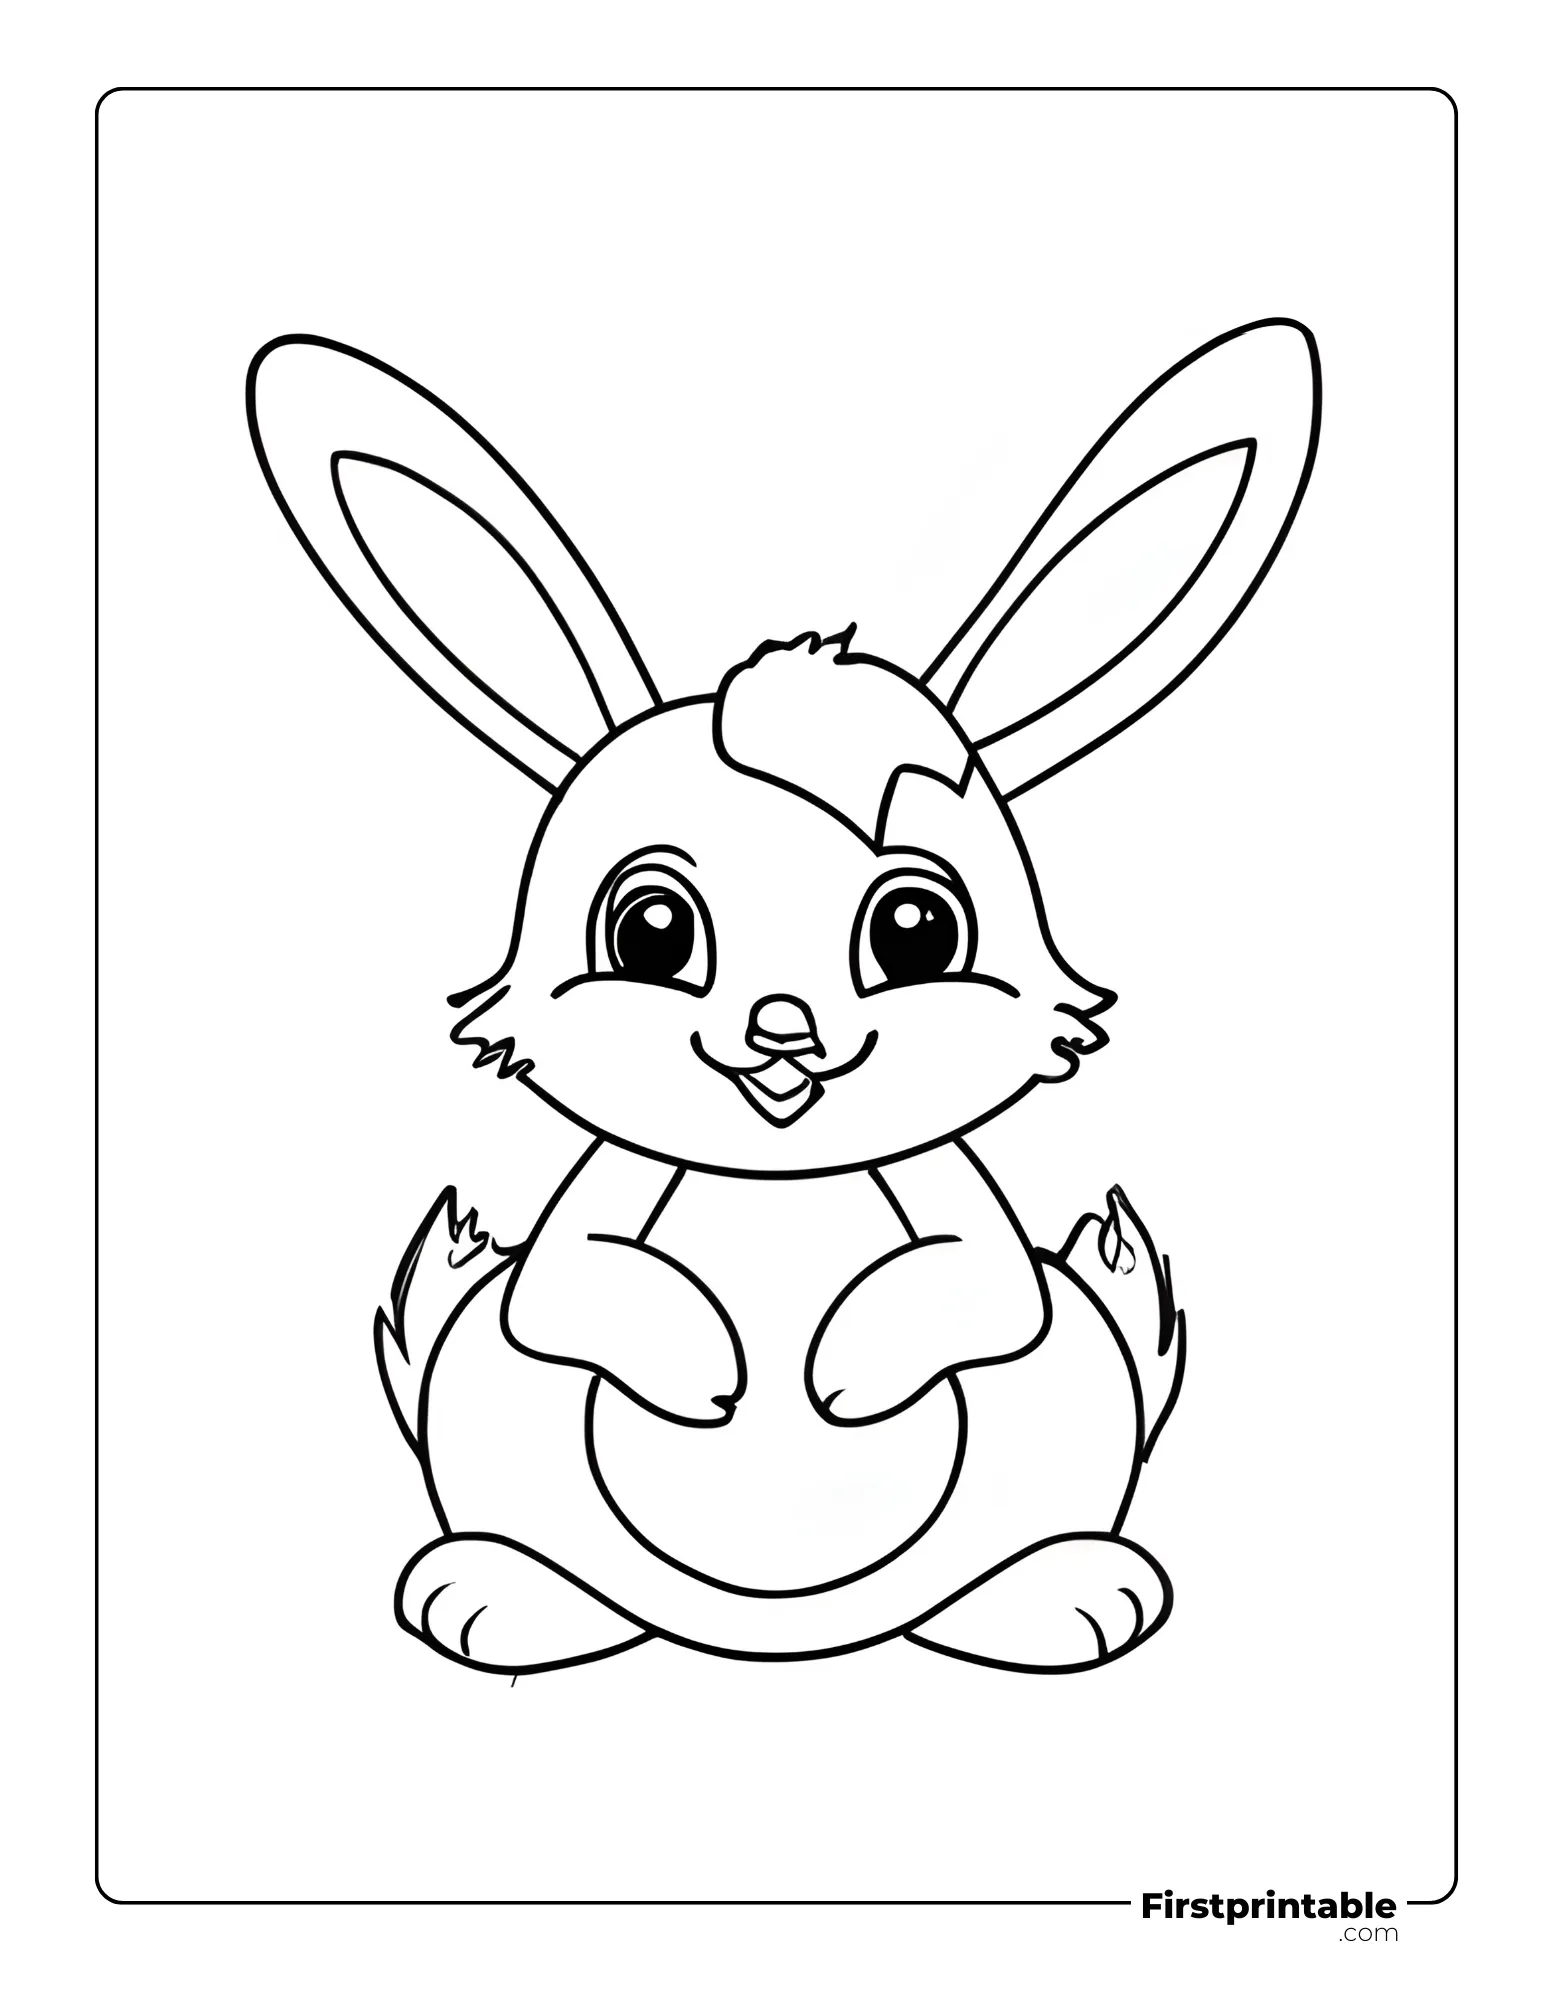 Easter bunny outline coloring page